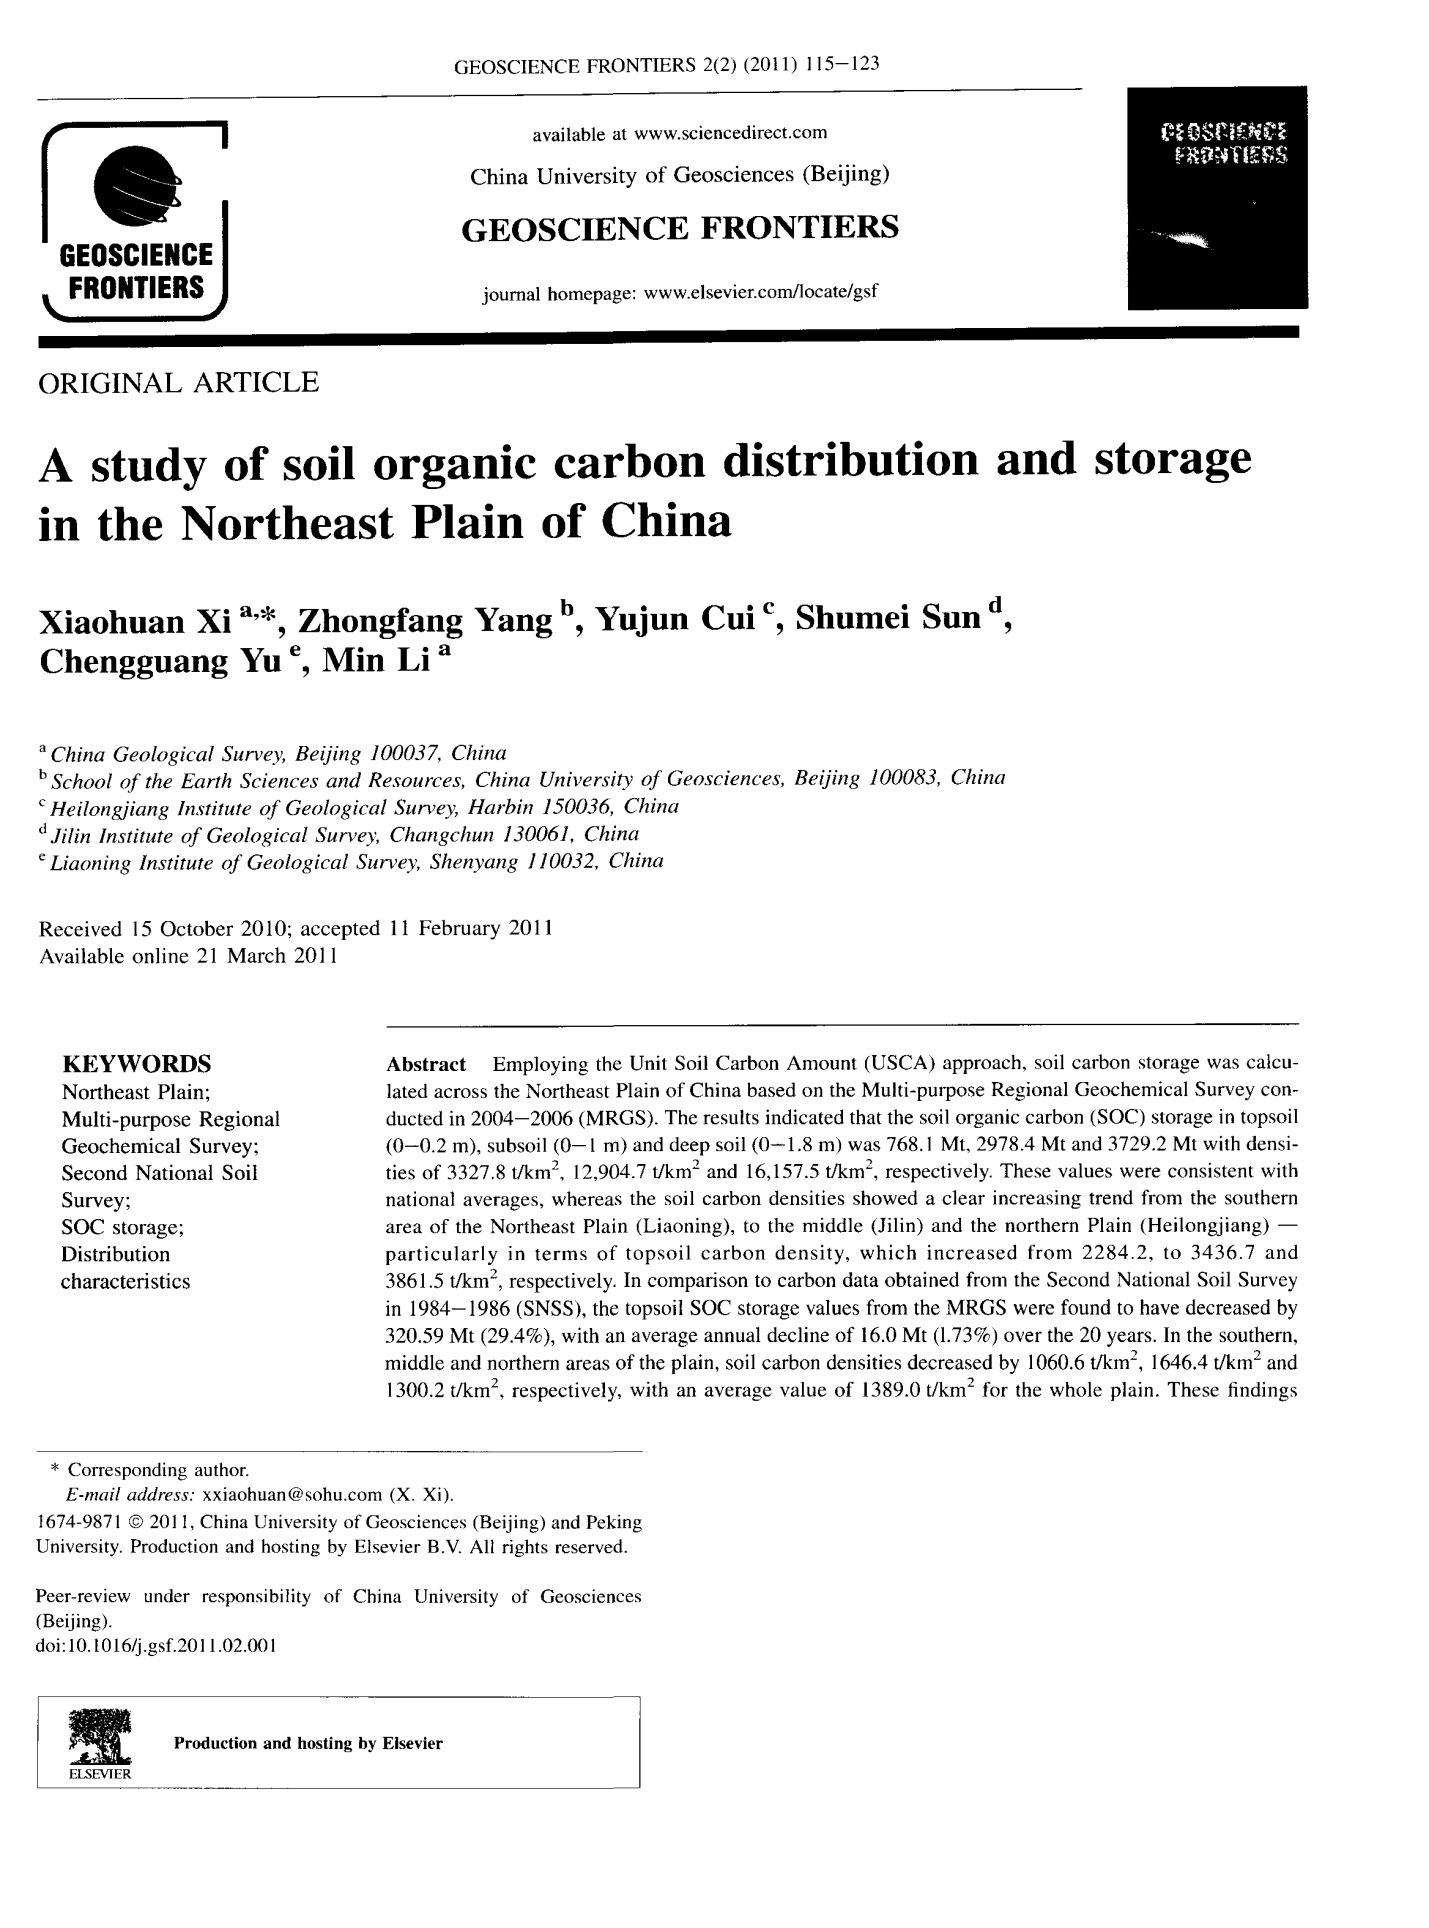 A study of soil organic carbon distribution and storage in the Northeast Plain of China